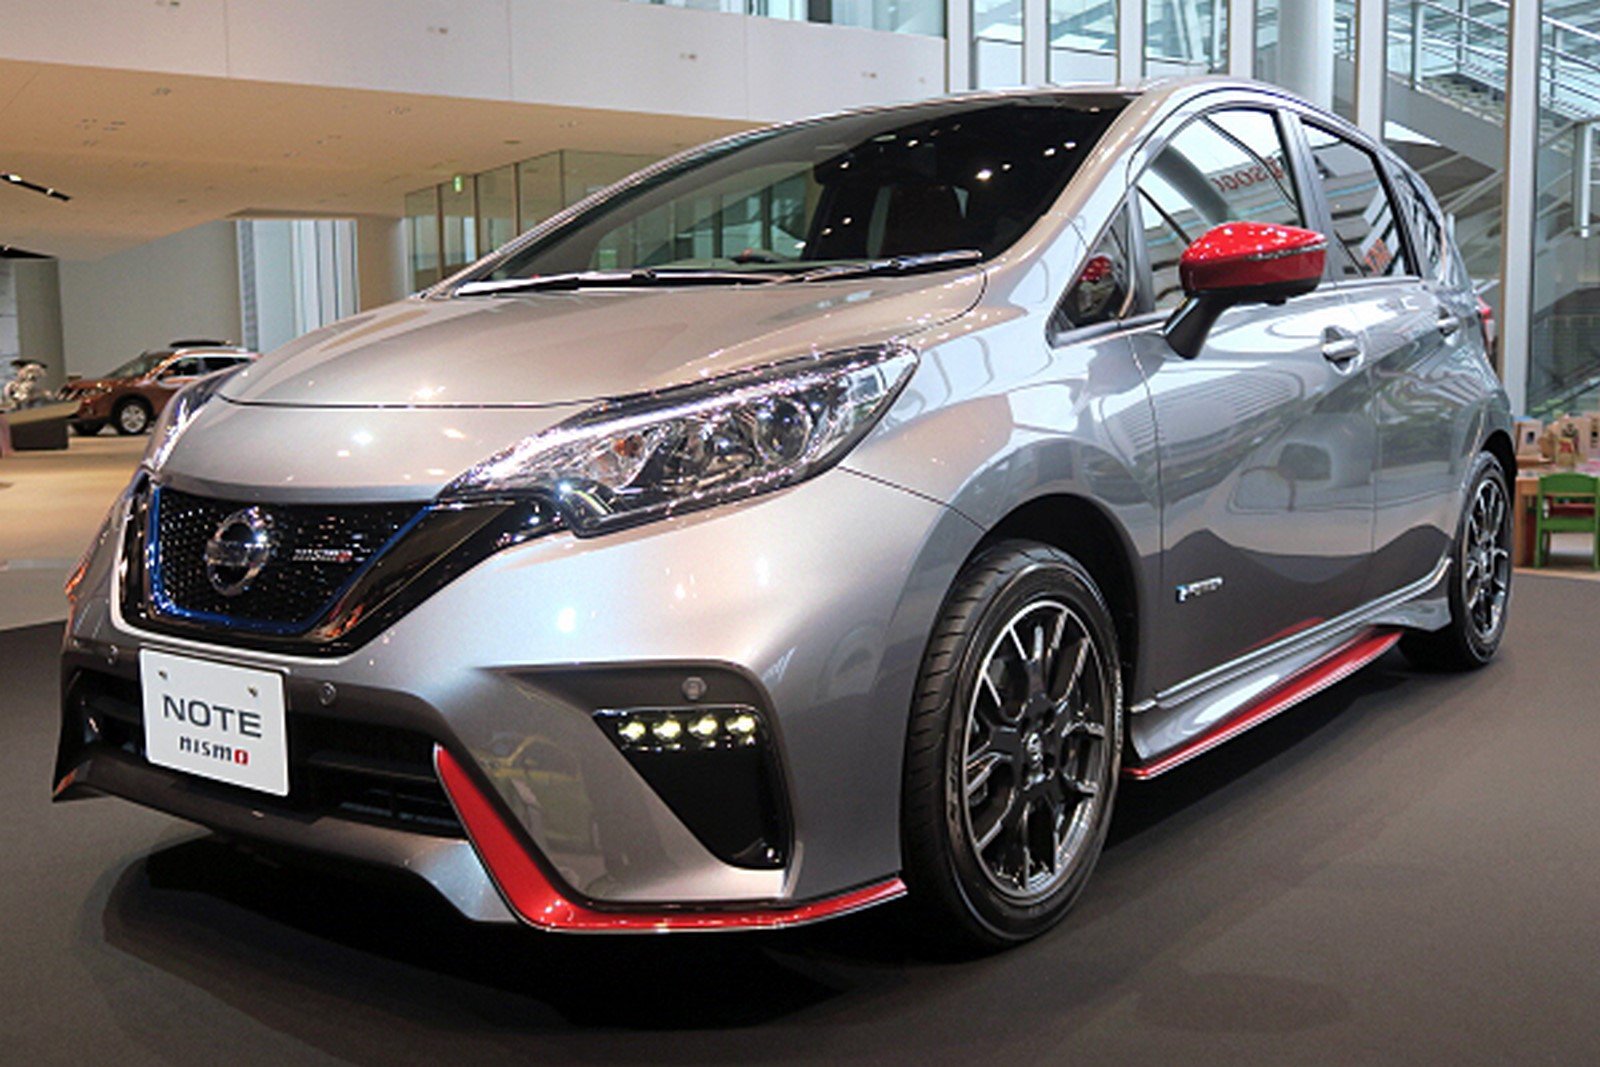 Nissan note 2020. Nissan Note e Power Nismo 2017. Nissan Note 2020 Nismo. Nissan Note 2017. Nissan Note 2017 гибрид.